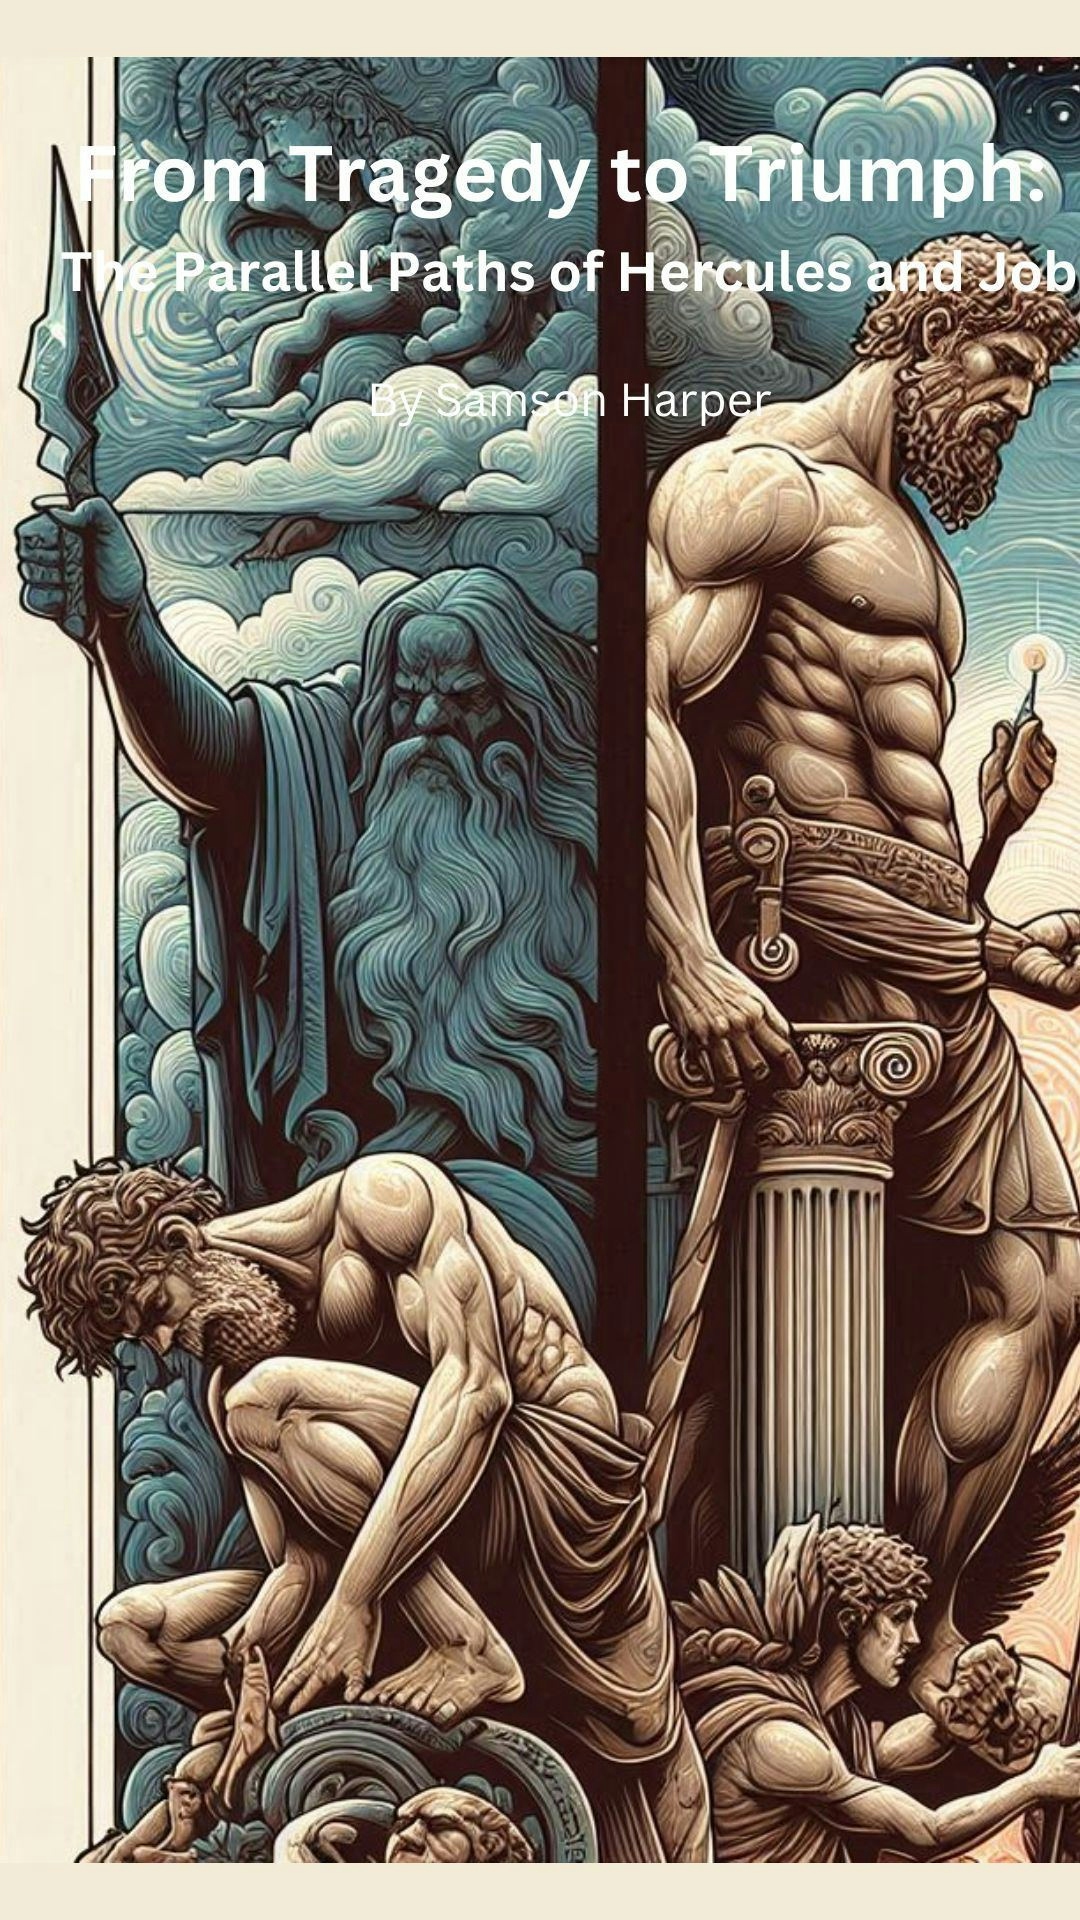 From Tragedy to Triumph: The Parallel Paths of Hercules and Job